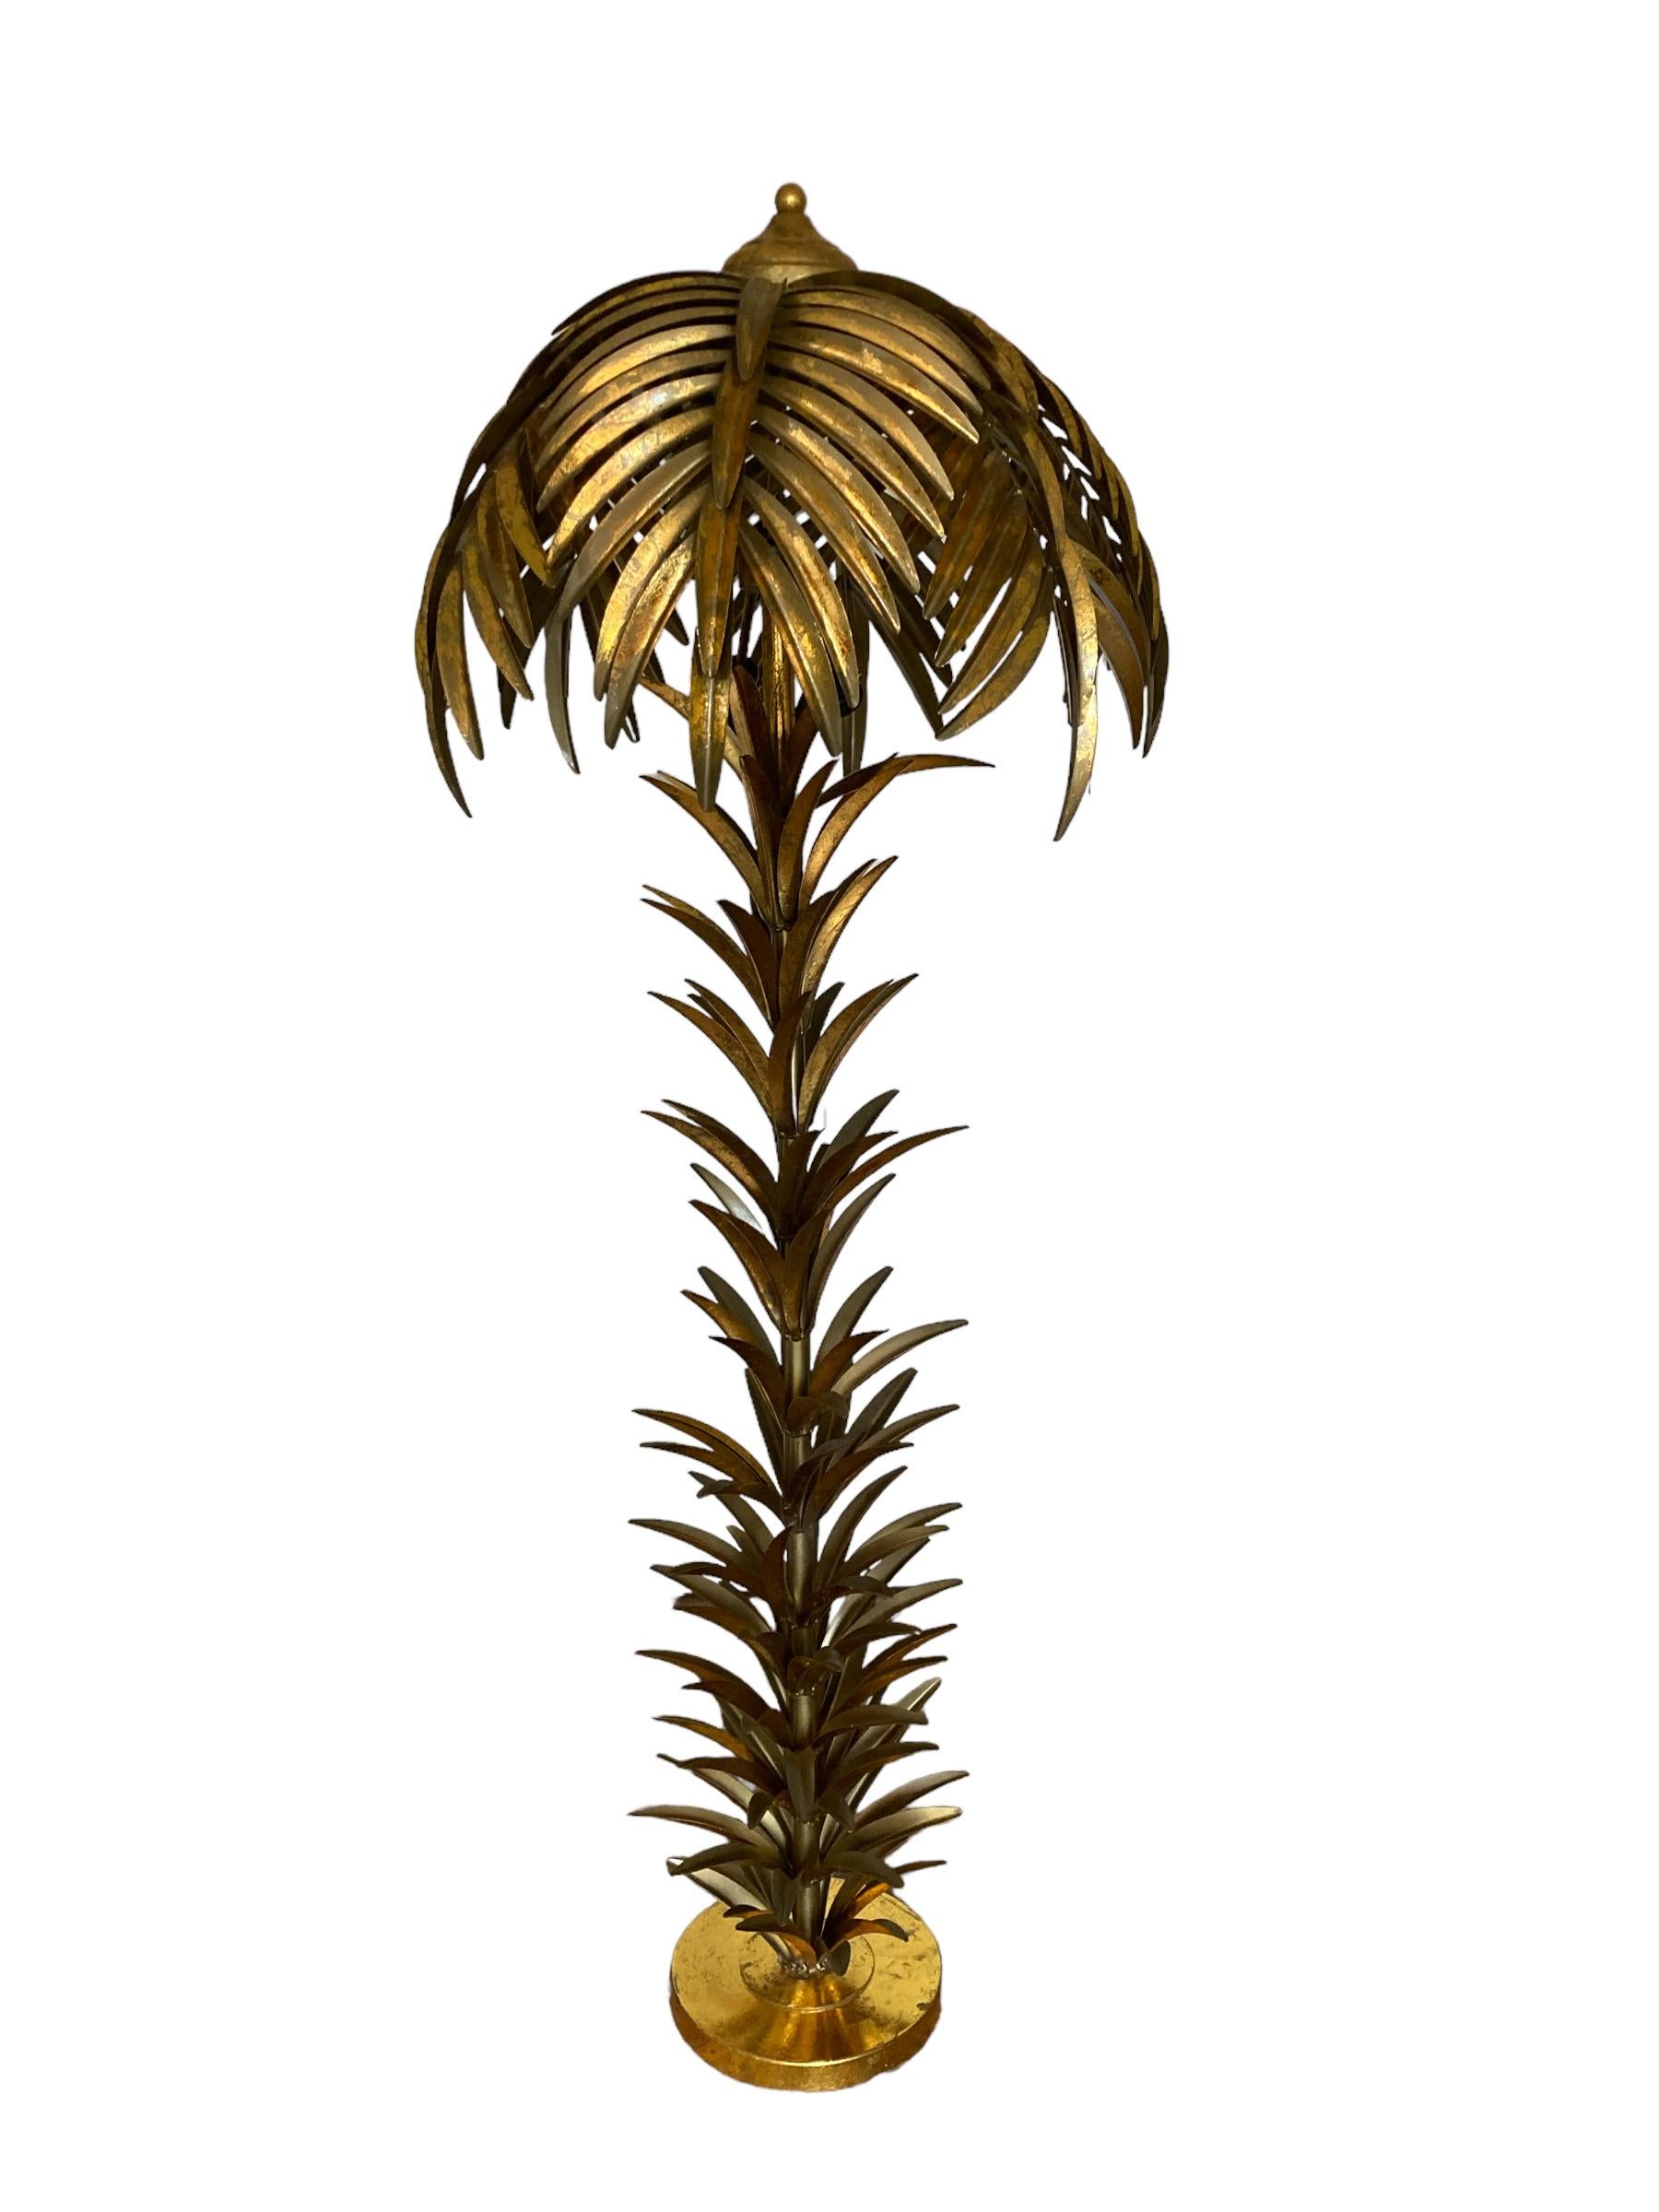 Hollywood Regency Style Gilt Metal Palm Tree Floor Lamp, Mid to late 20th Century. This tall floor lamp has amazing presence in any room and style of interior design. A rare floor lamp in this design and with an essence of Vivai Del Sud with the